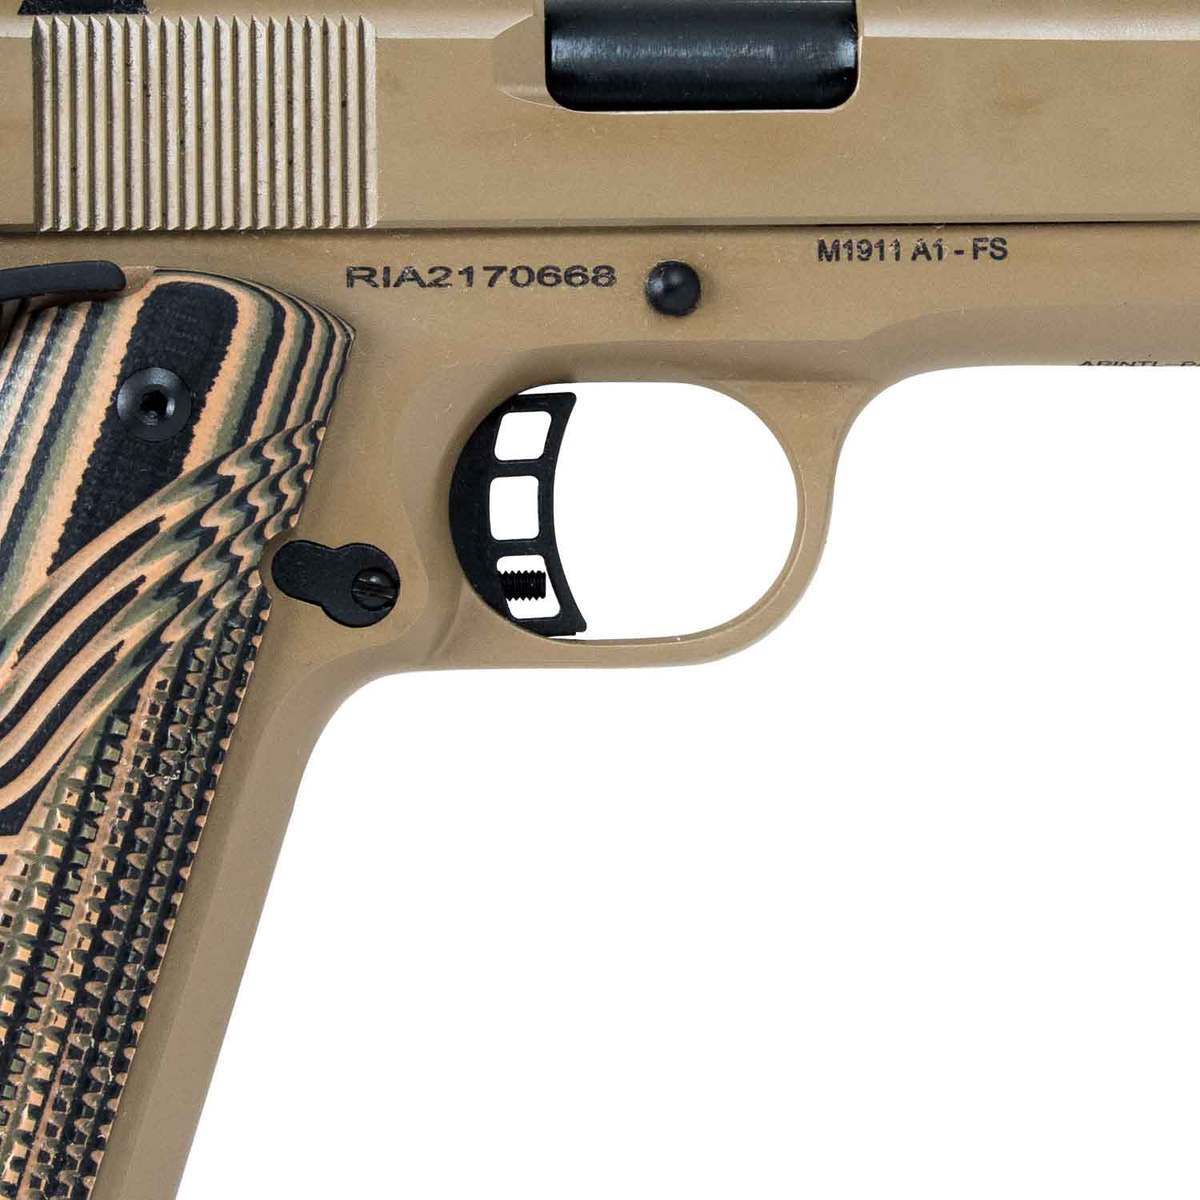 Rock Island M1911 A1 Fs Tactical 45 Auto Acp 5in Camoblack Pistol 81 Rounds Tan 0854